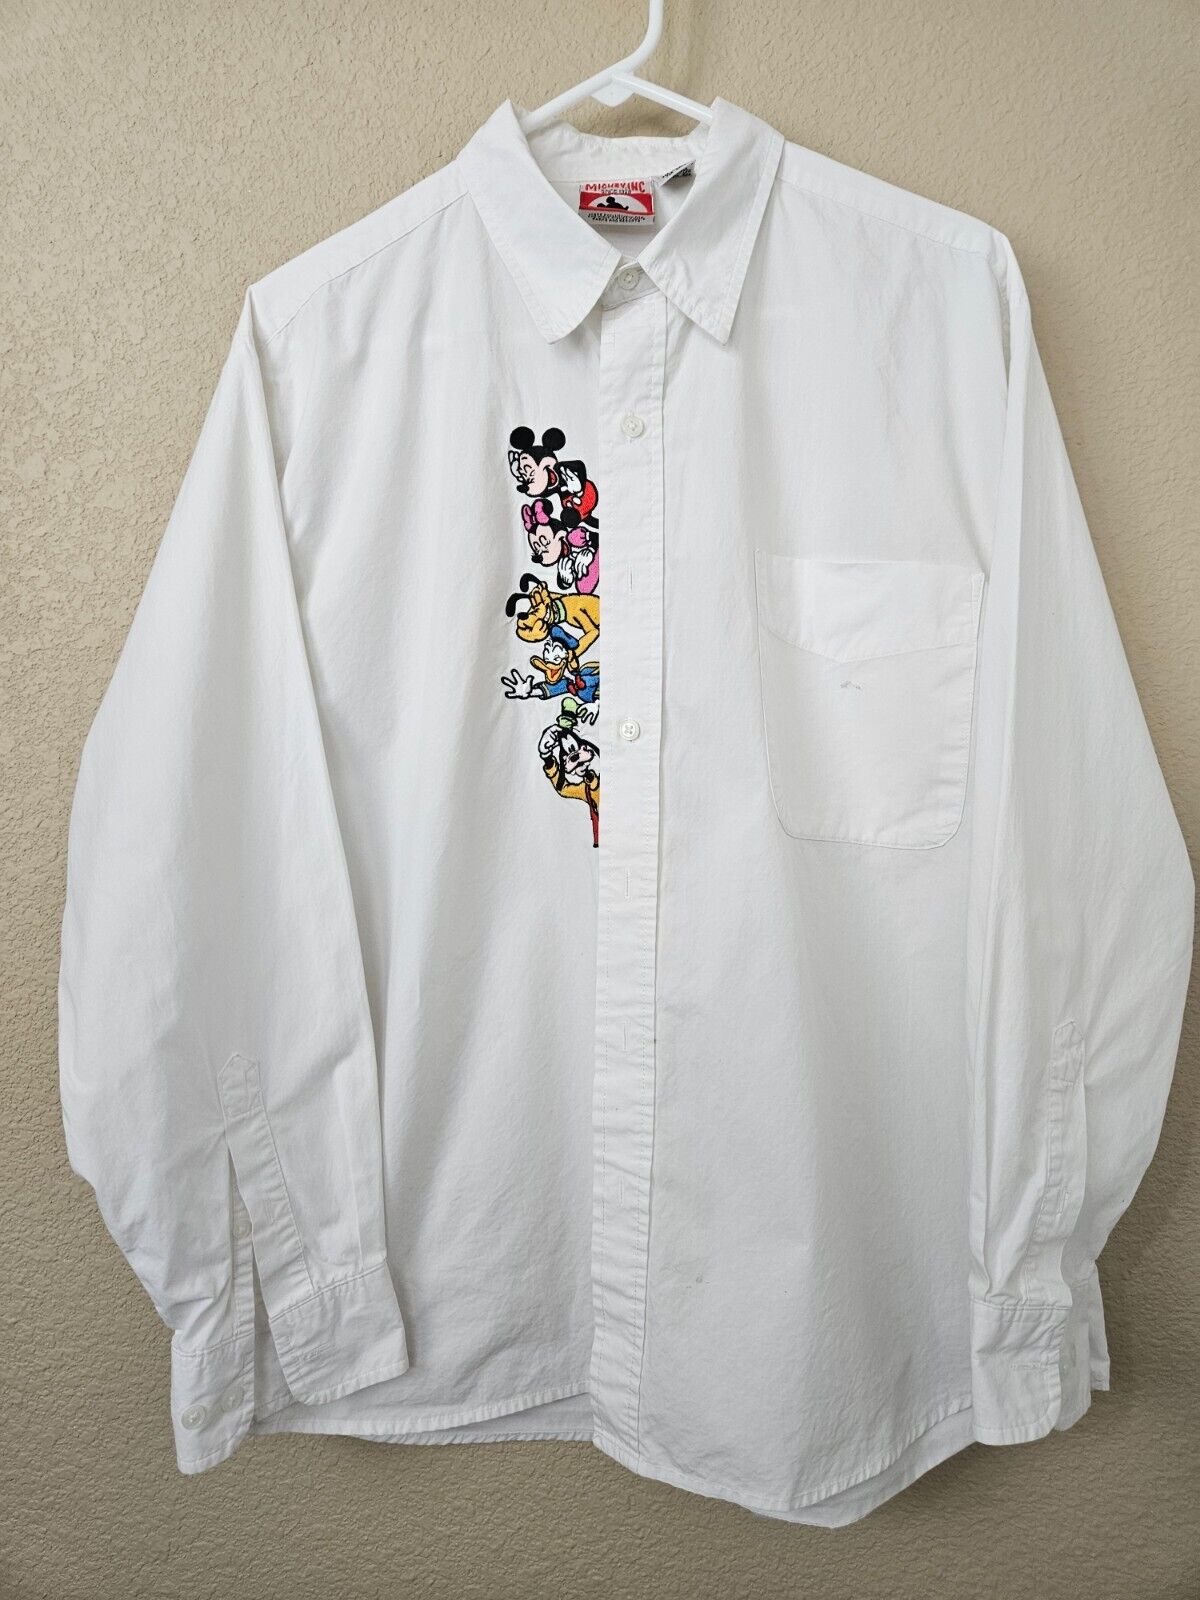 VINTAGE MICKEY INC  EMBROIDERED Logo WHITE BUTTON SHIRT SZ Large. Very fresh